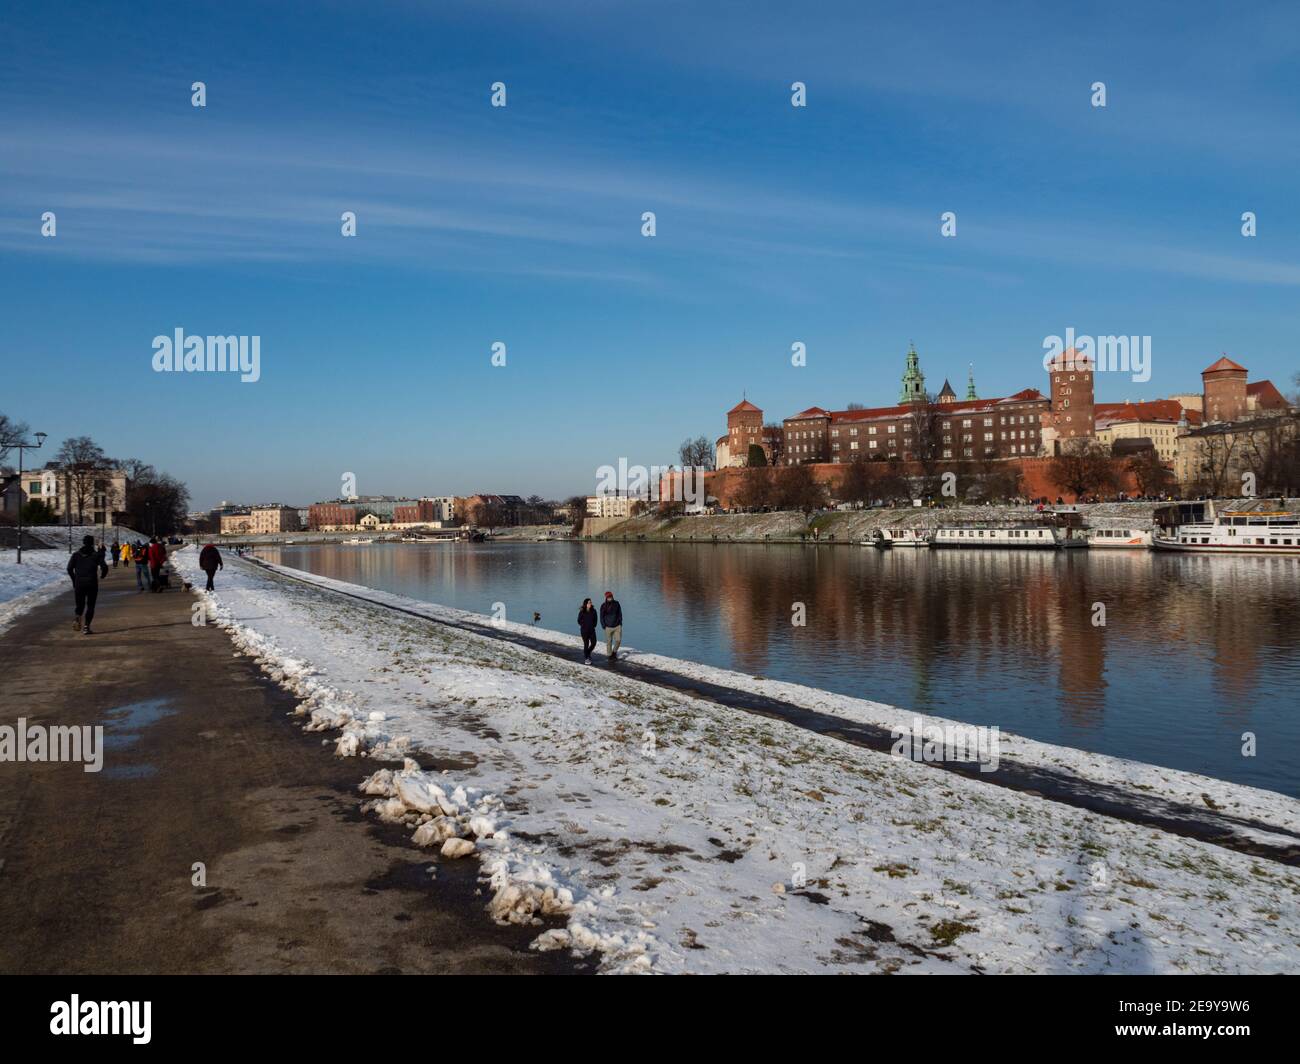 31/01/2021 - Poland Cracow. Vistula River boulevards. Winter cold day and people running or walking. Wawel Castle in the background. Stock Photo